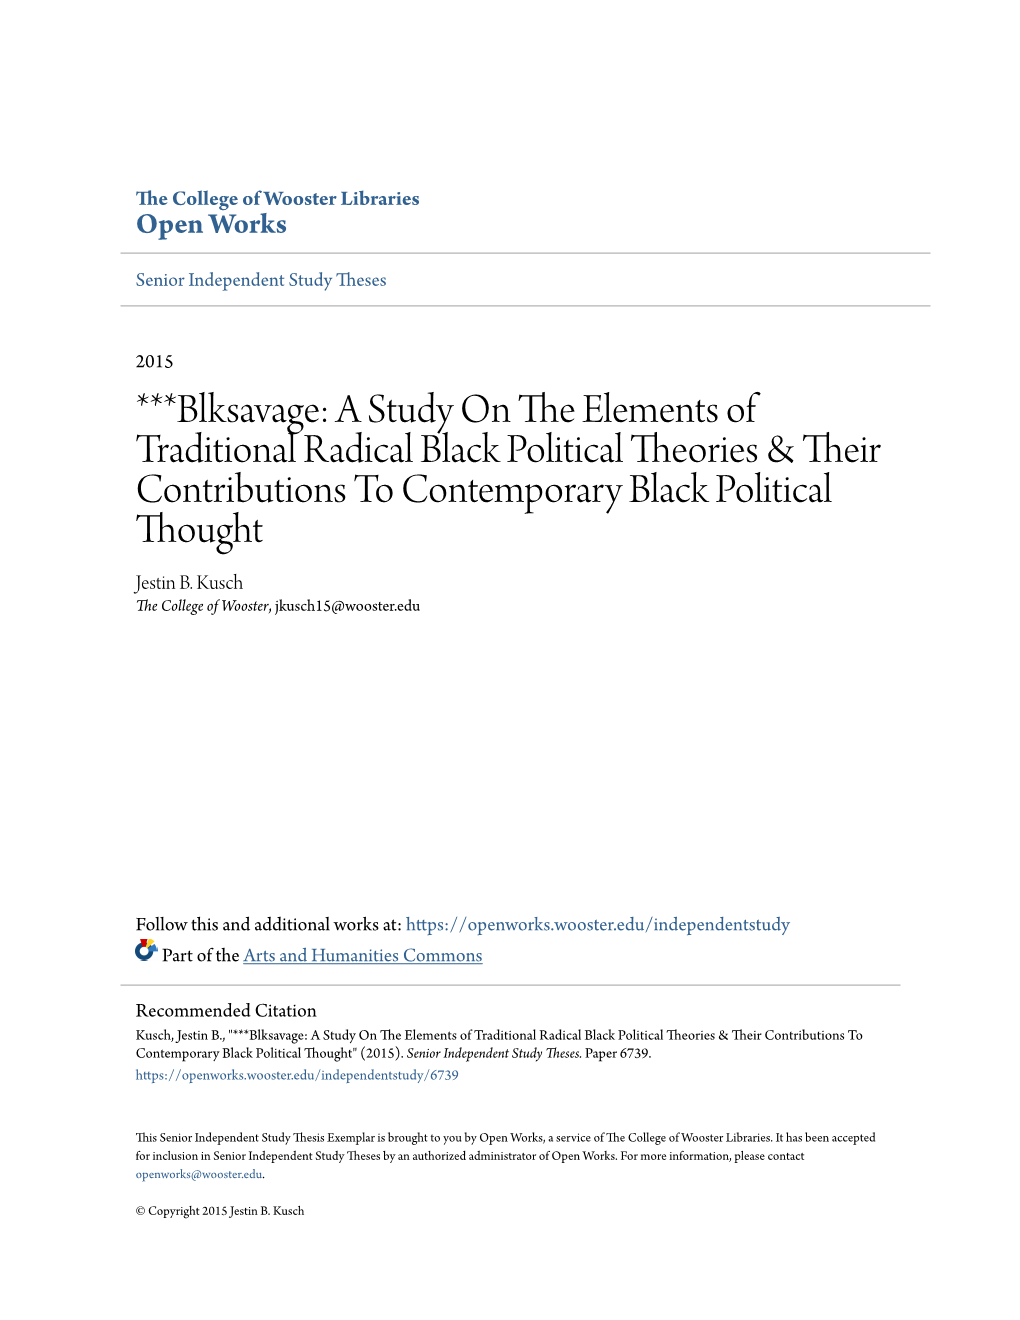 Blksavage: a Study on the Elements of Traditional Radical Black Political Theories & Their Onc Tributions to Contemporary Black Political Thought" (2015)